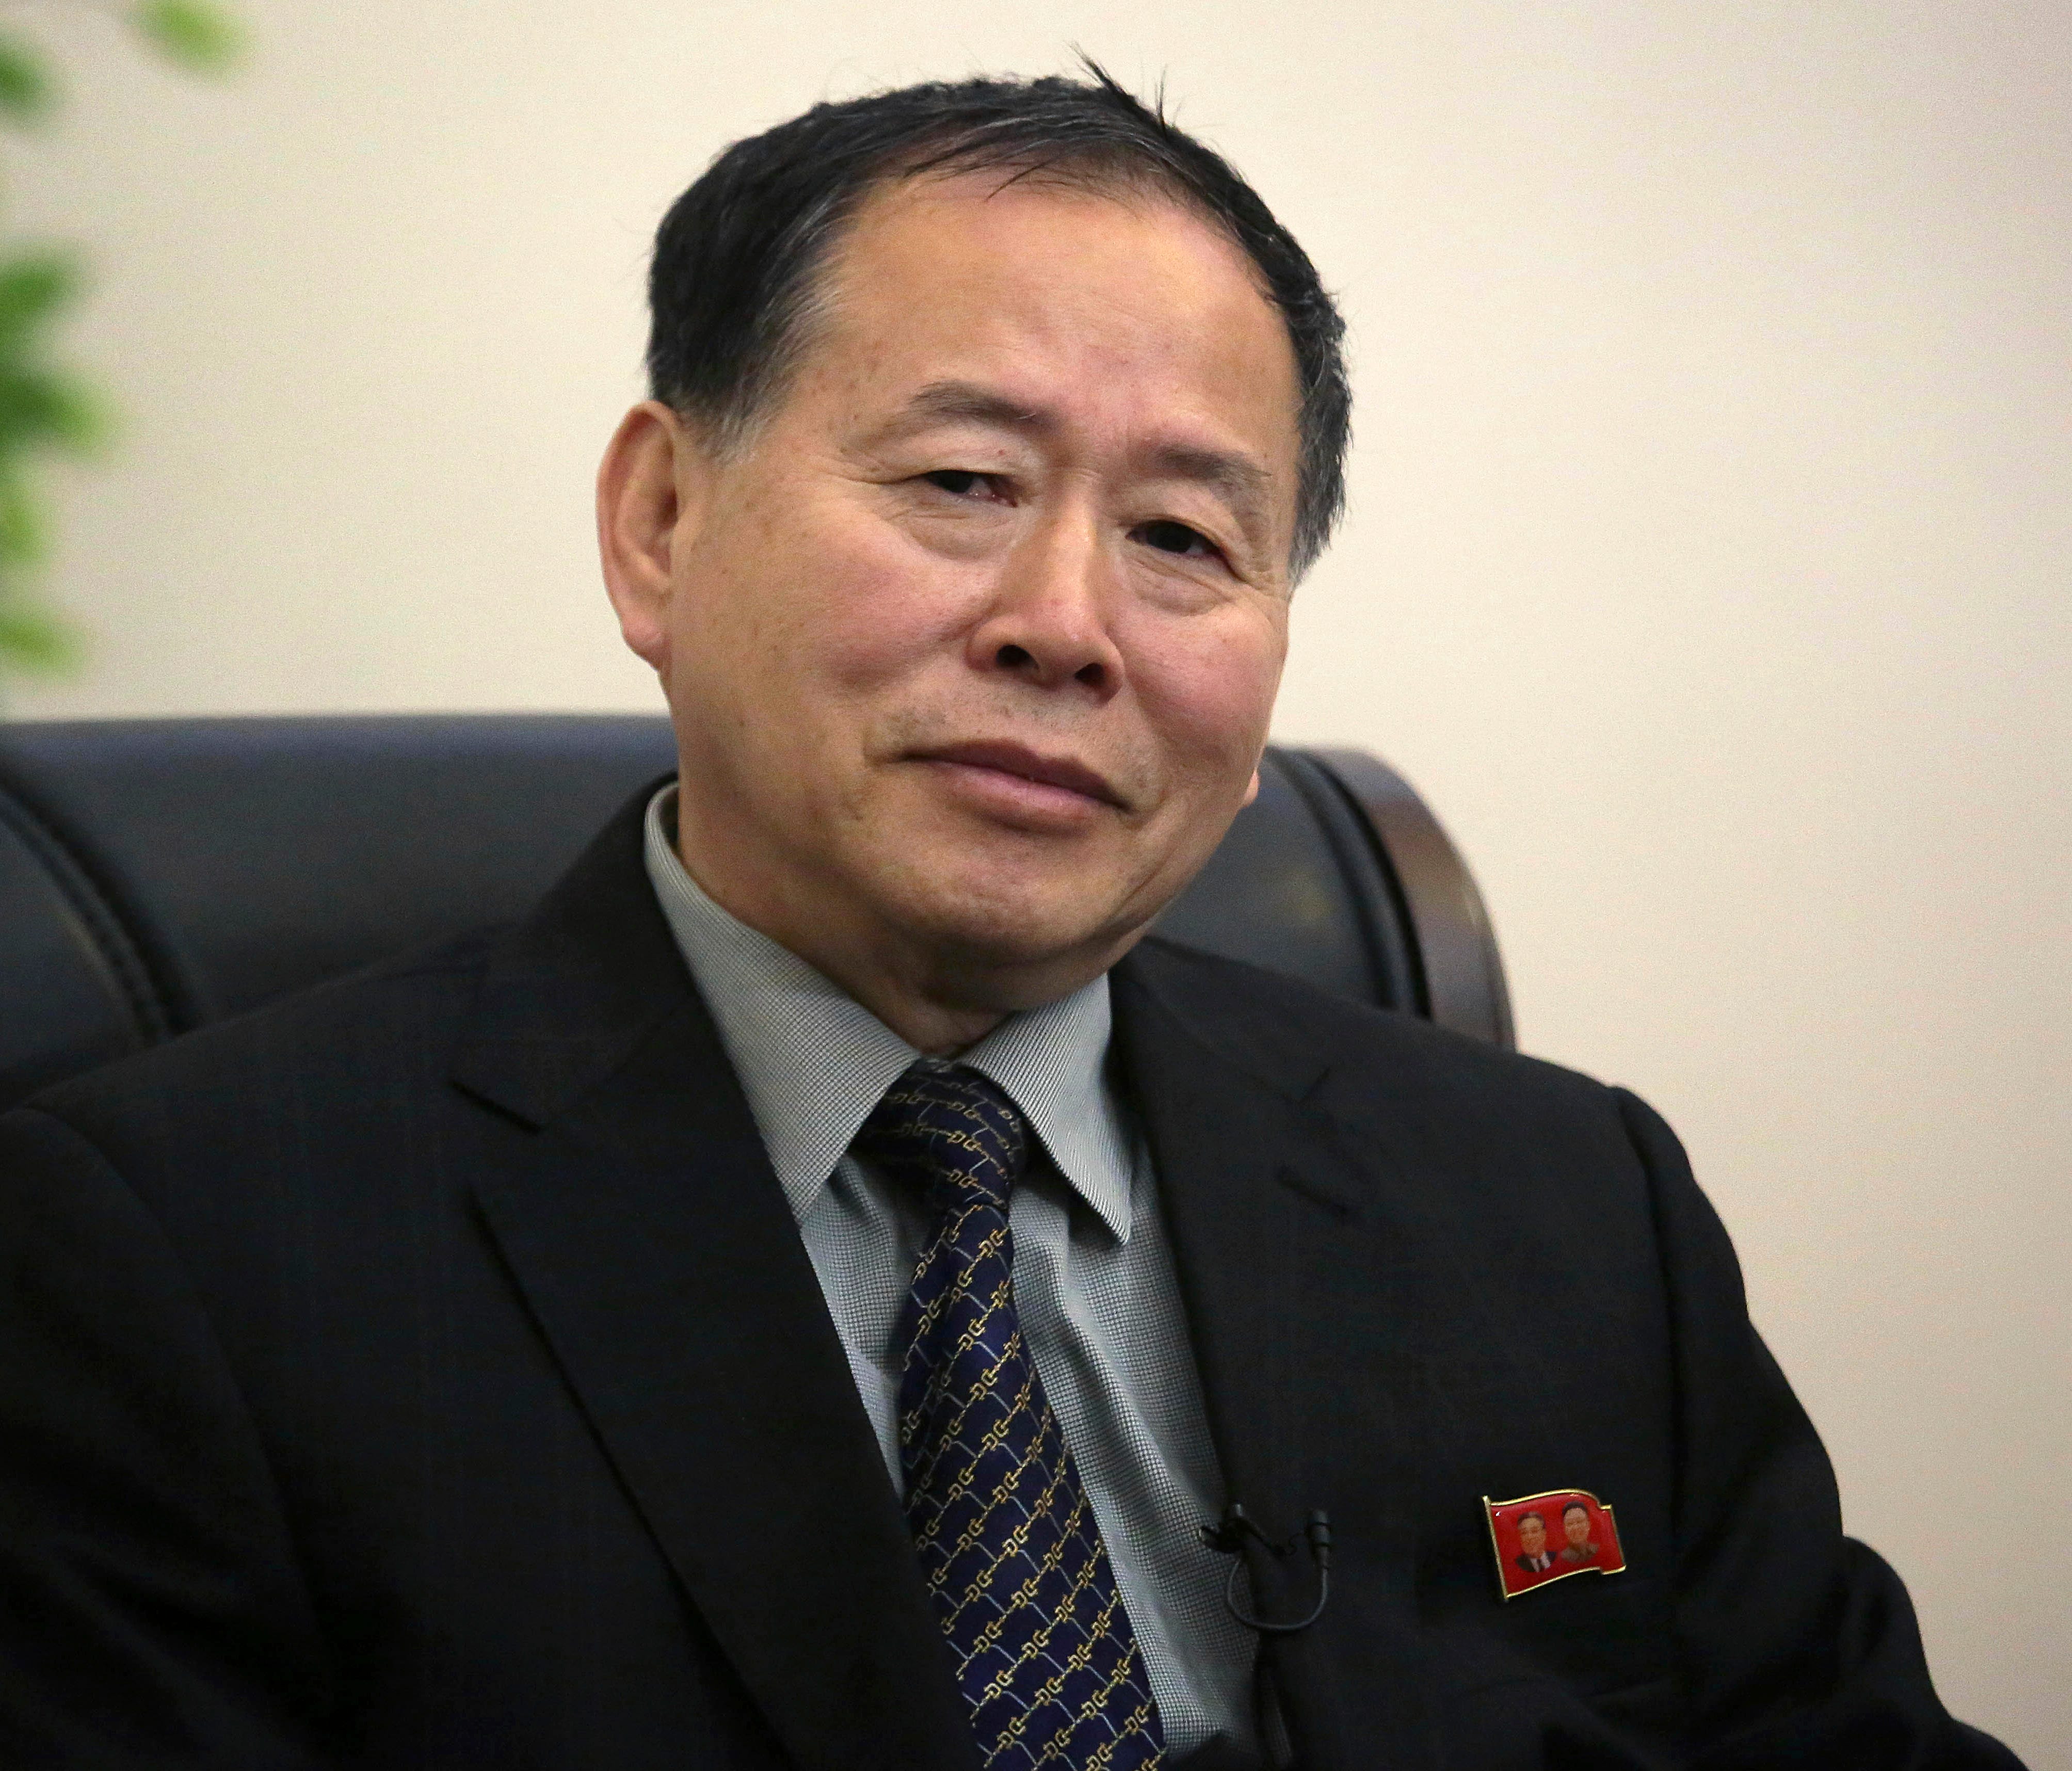 North Korea's vice minister Han Song Ryol is pictured during an interview with The Associated Press in Pyongyang, North Korea.